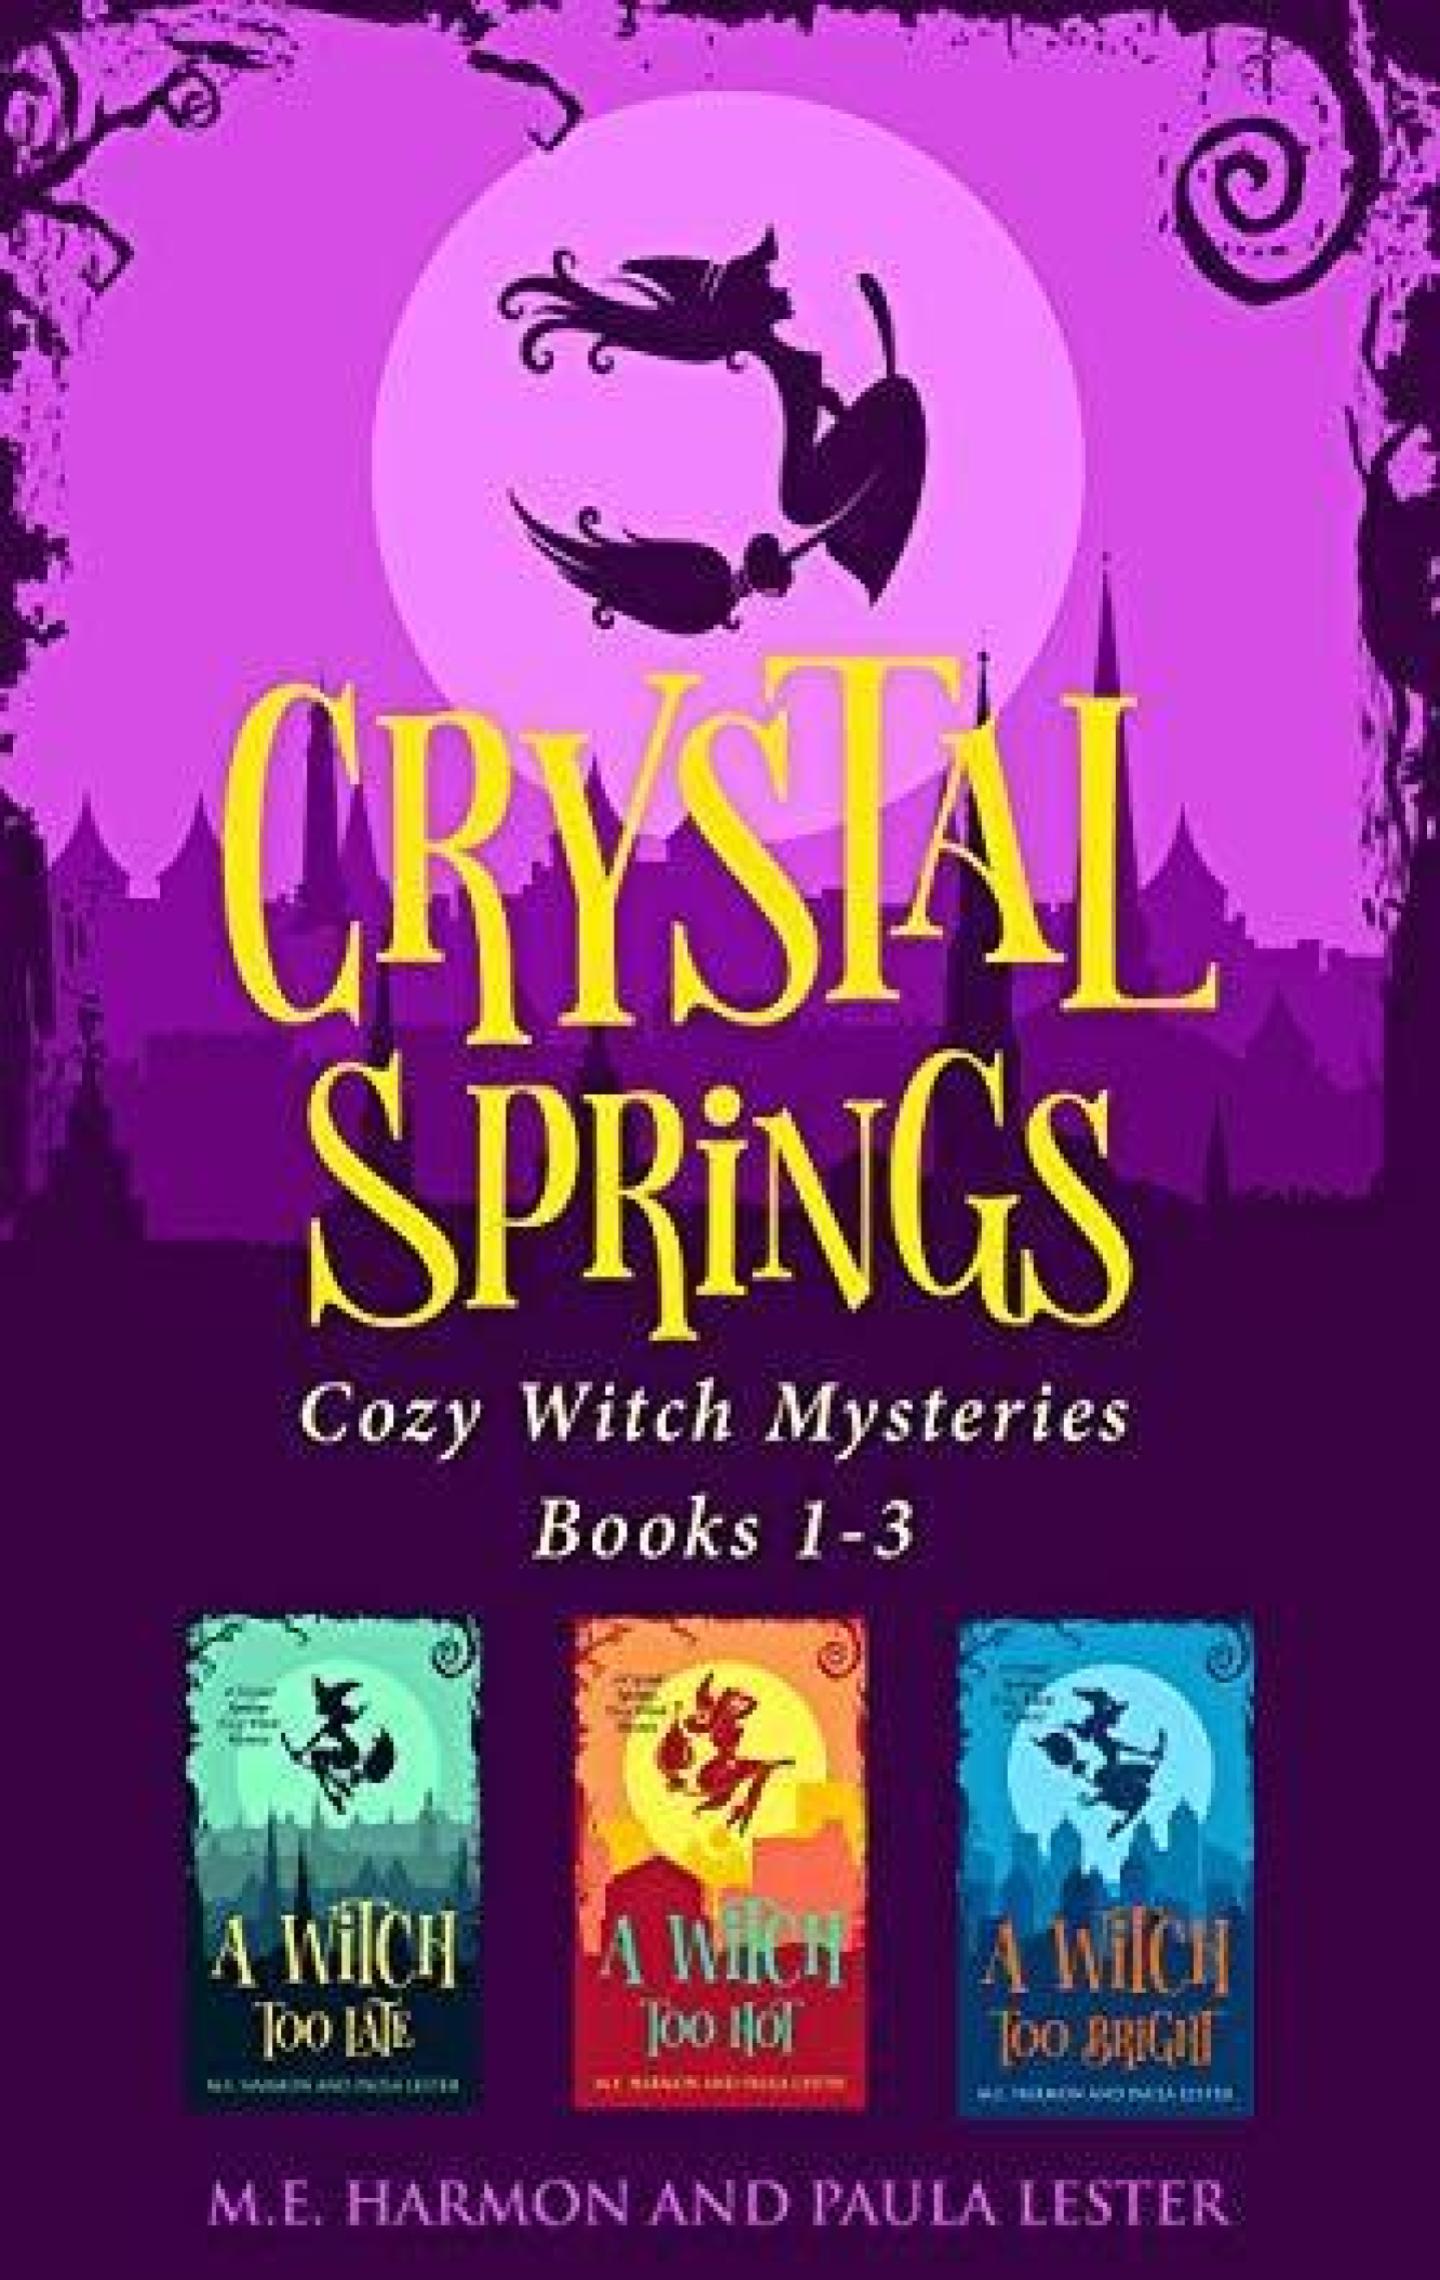 Crystal Springs Cozy Witch Mysteries Boxset 1